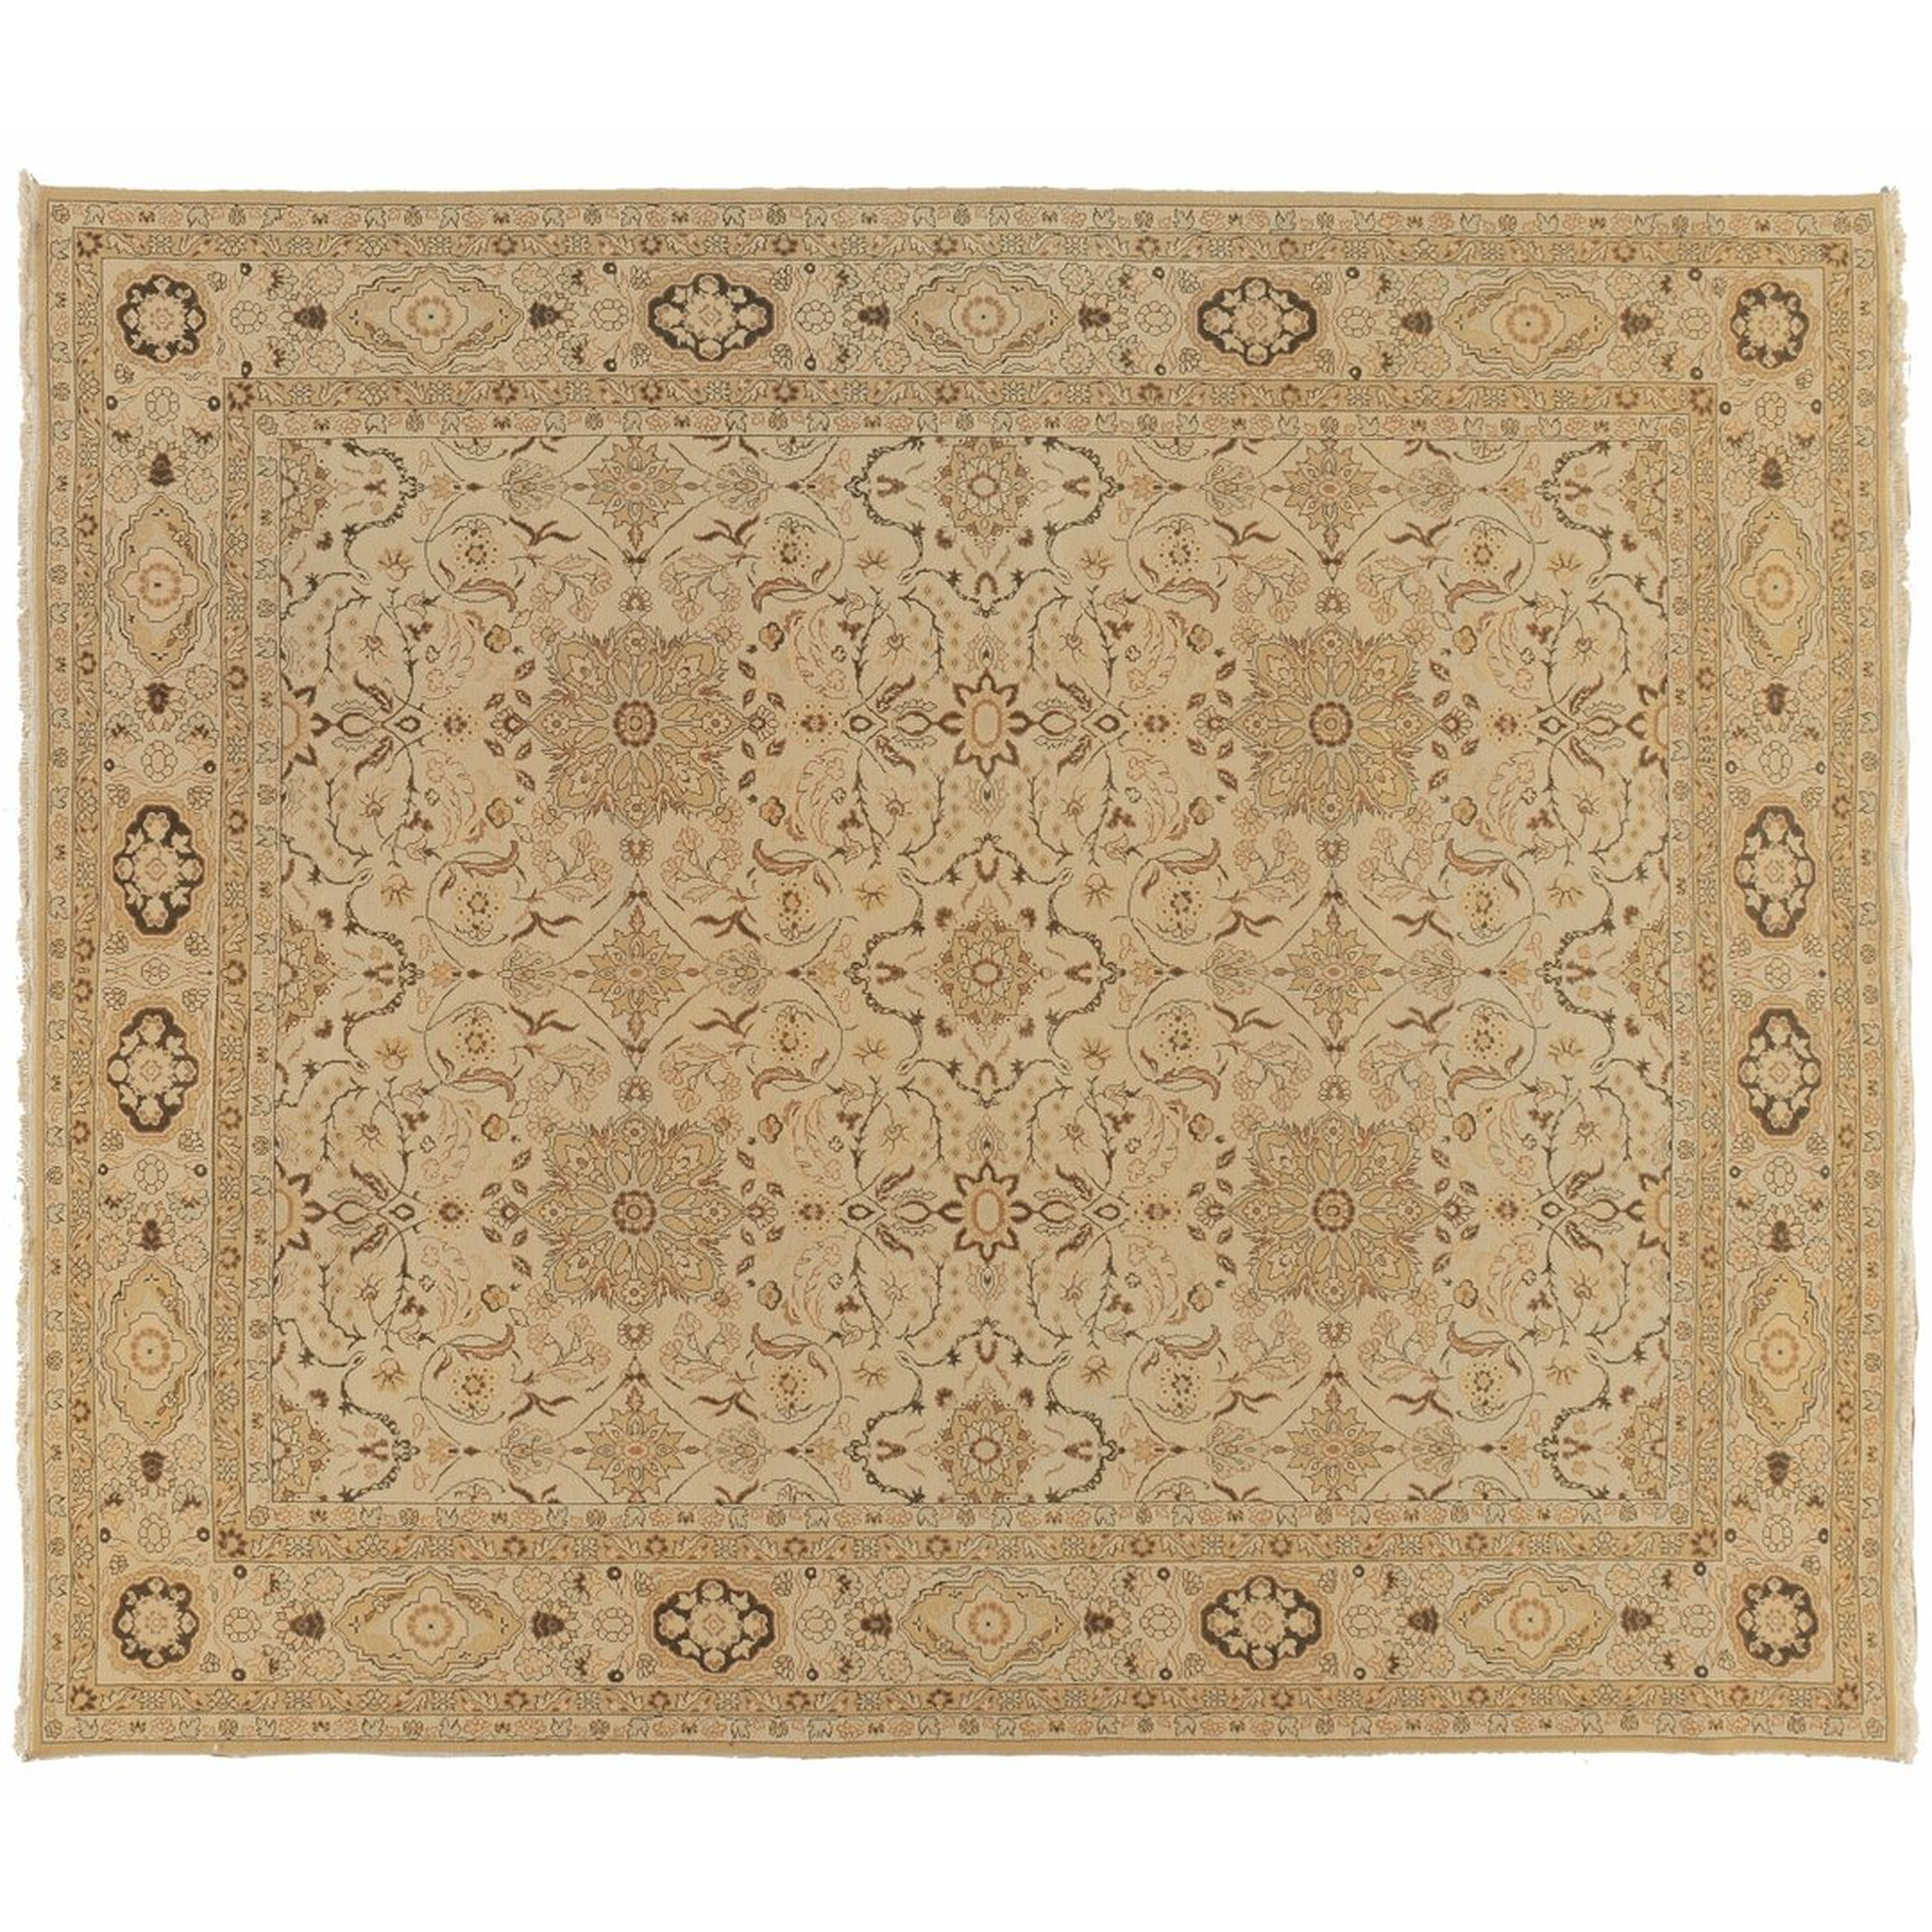 Aga John Oriental Rugs One-of-a-Kind Hand-Knotted Tan/Beige 8' x 10' Wool Area Rug - Perigold